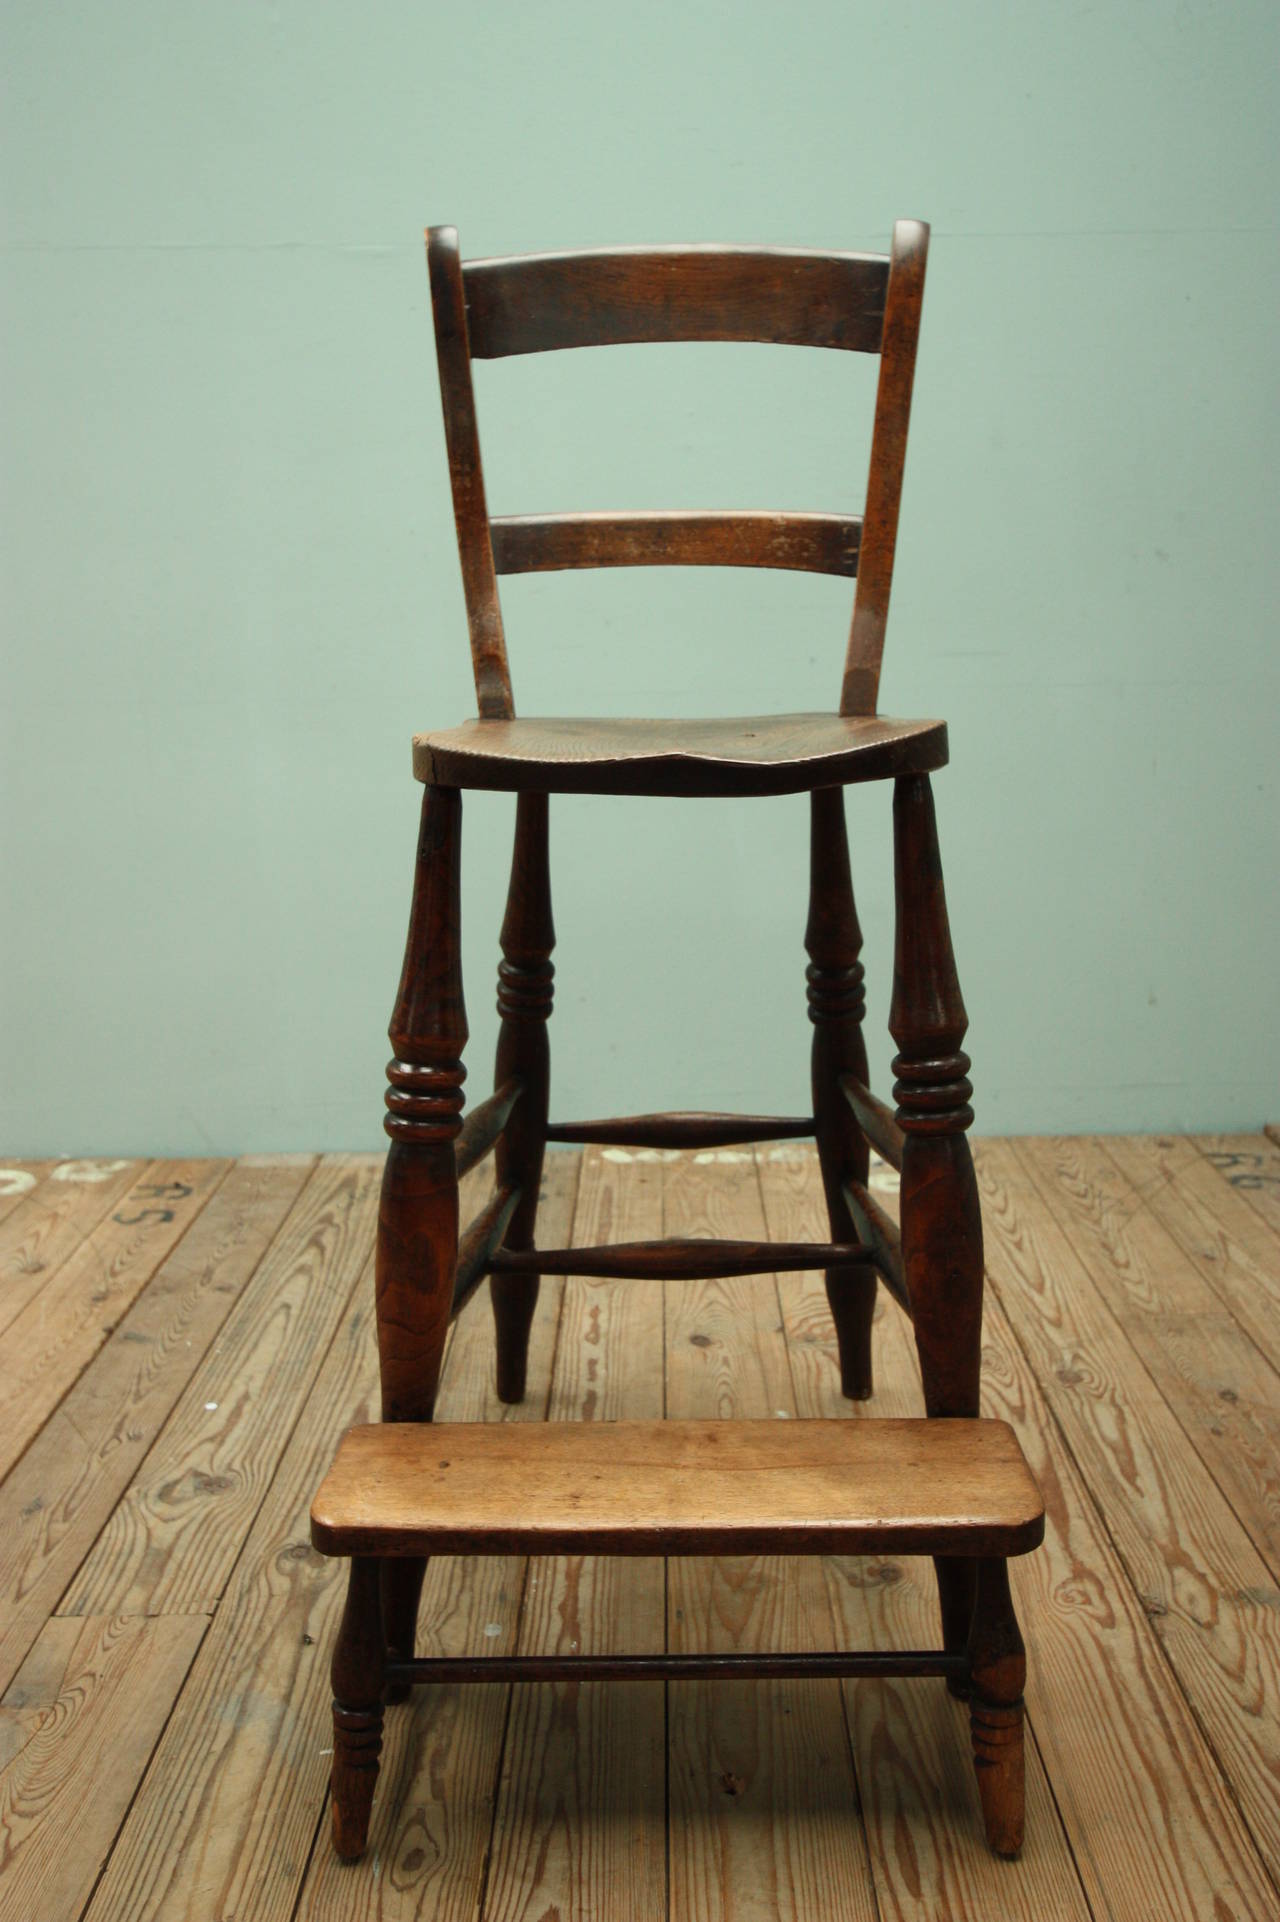 19th Century Country Antique Barber's Chair.
This is a lovely, simple antique barber's chair from the North of England, around 1840-50.
Made in ash and beech wood and still in the original finish.
In very good, solid condition, an unusual antique